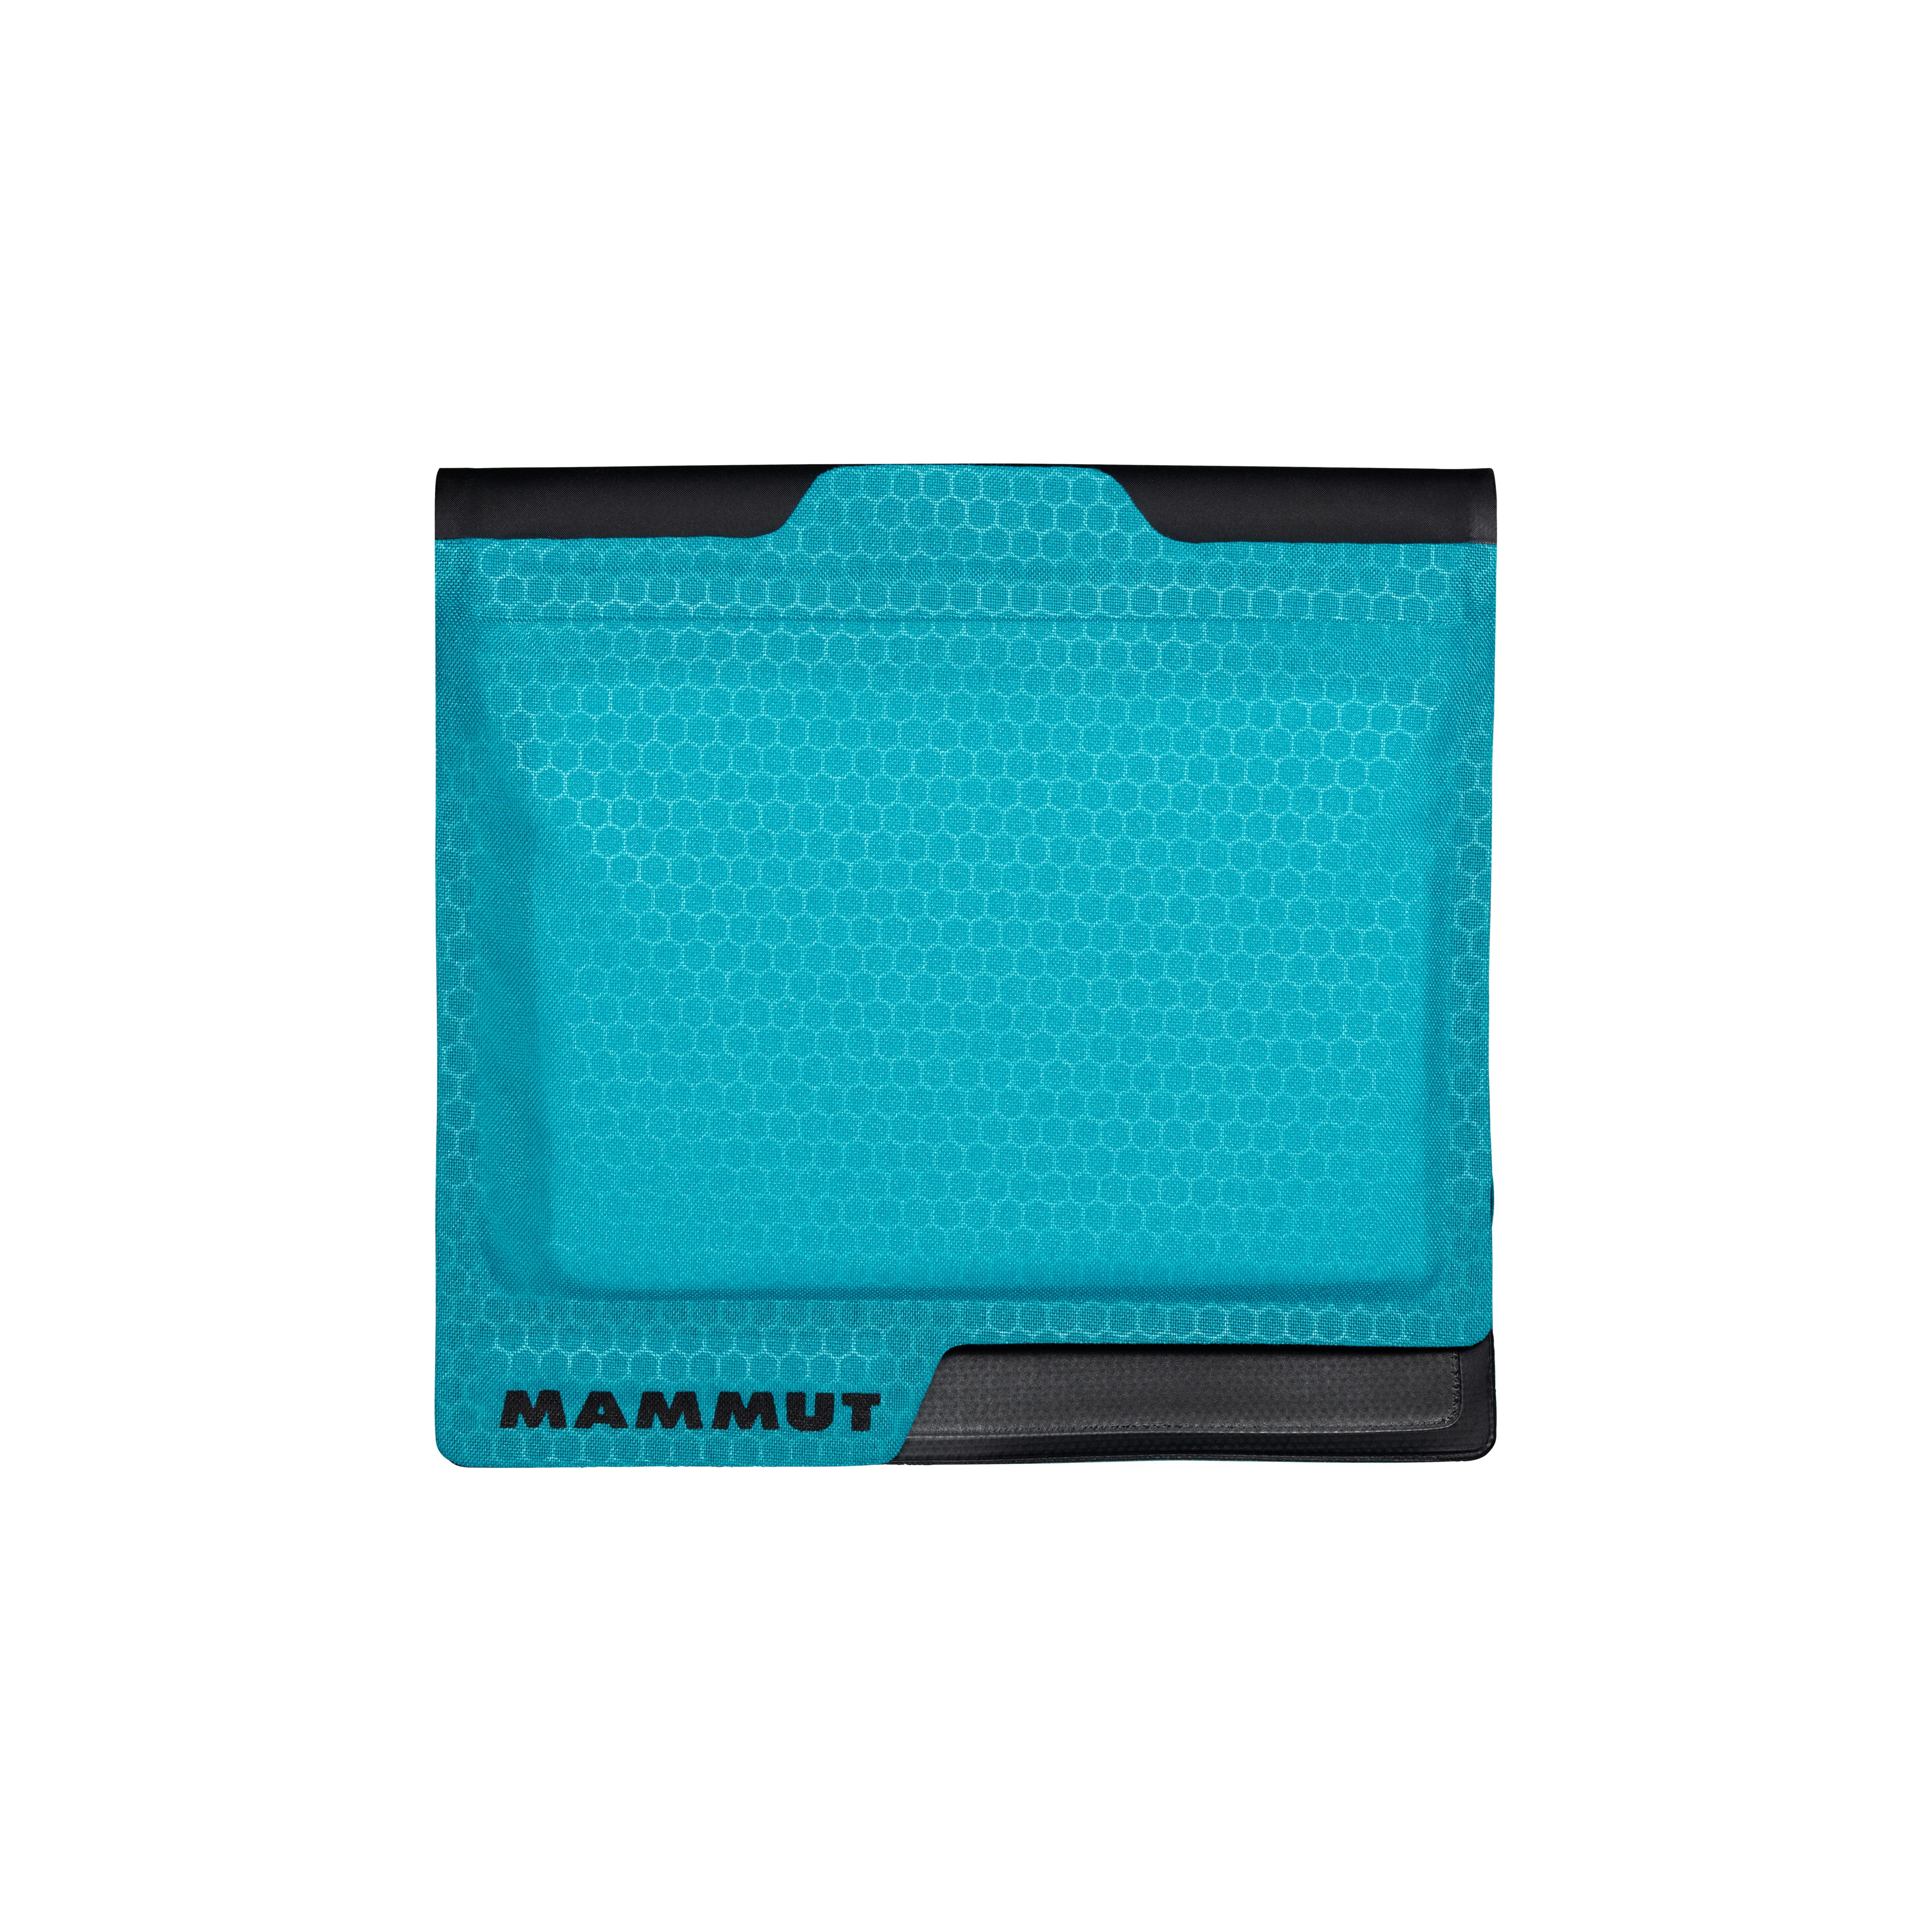 Smart Wallet Light - waters, one size product image